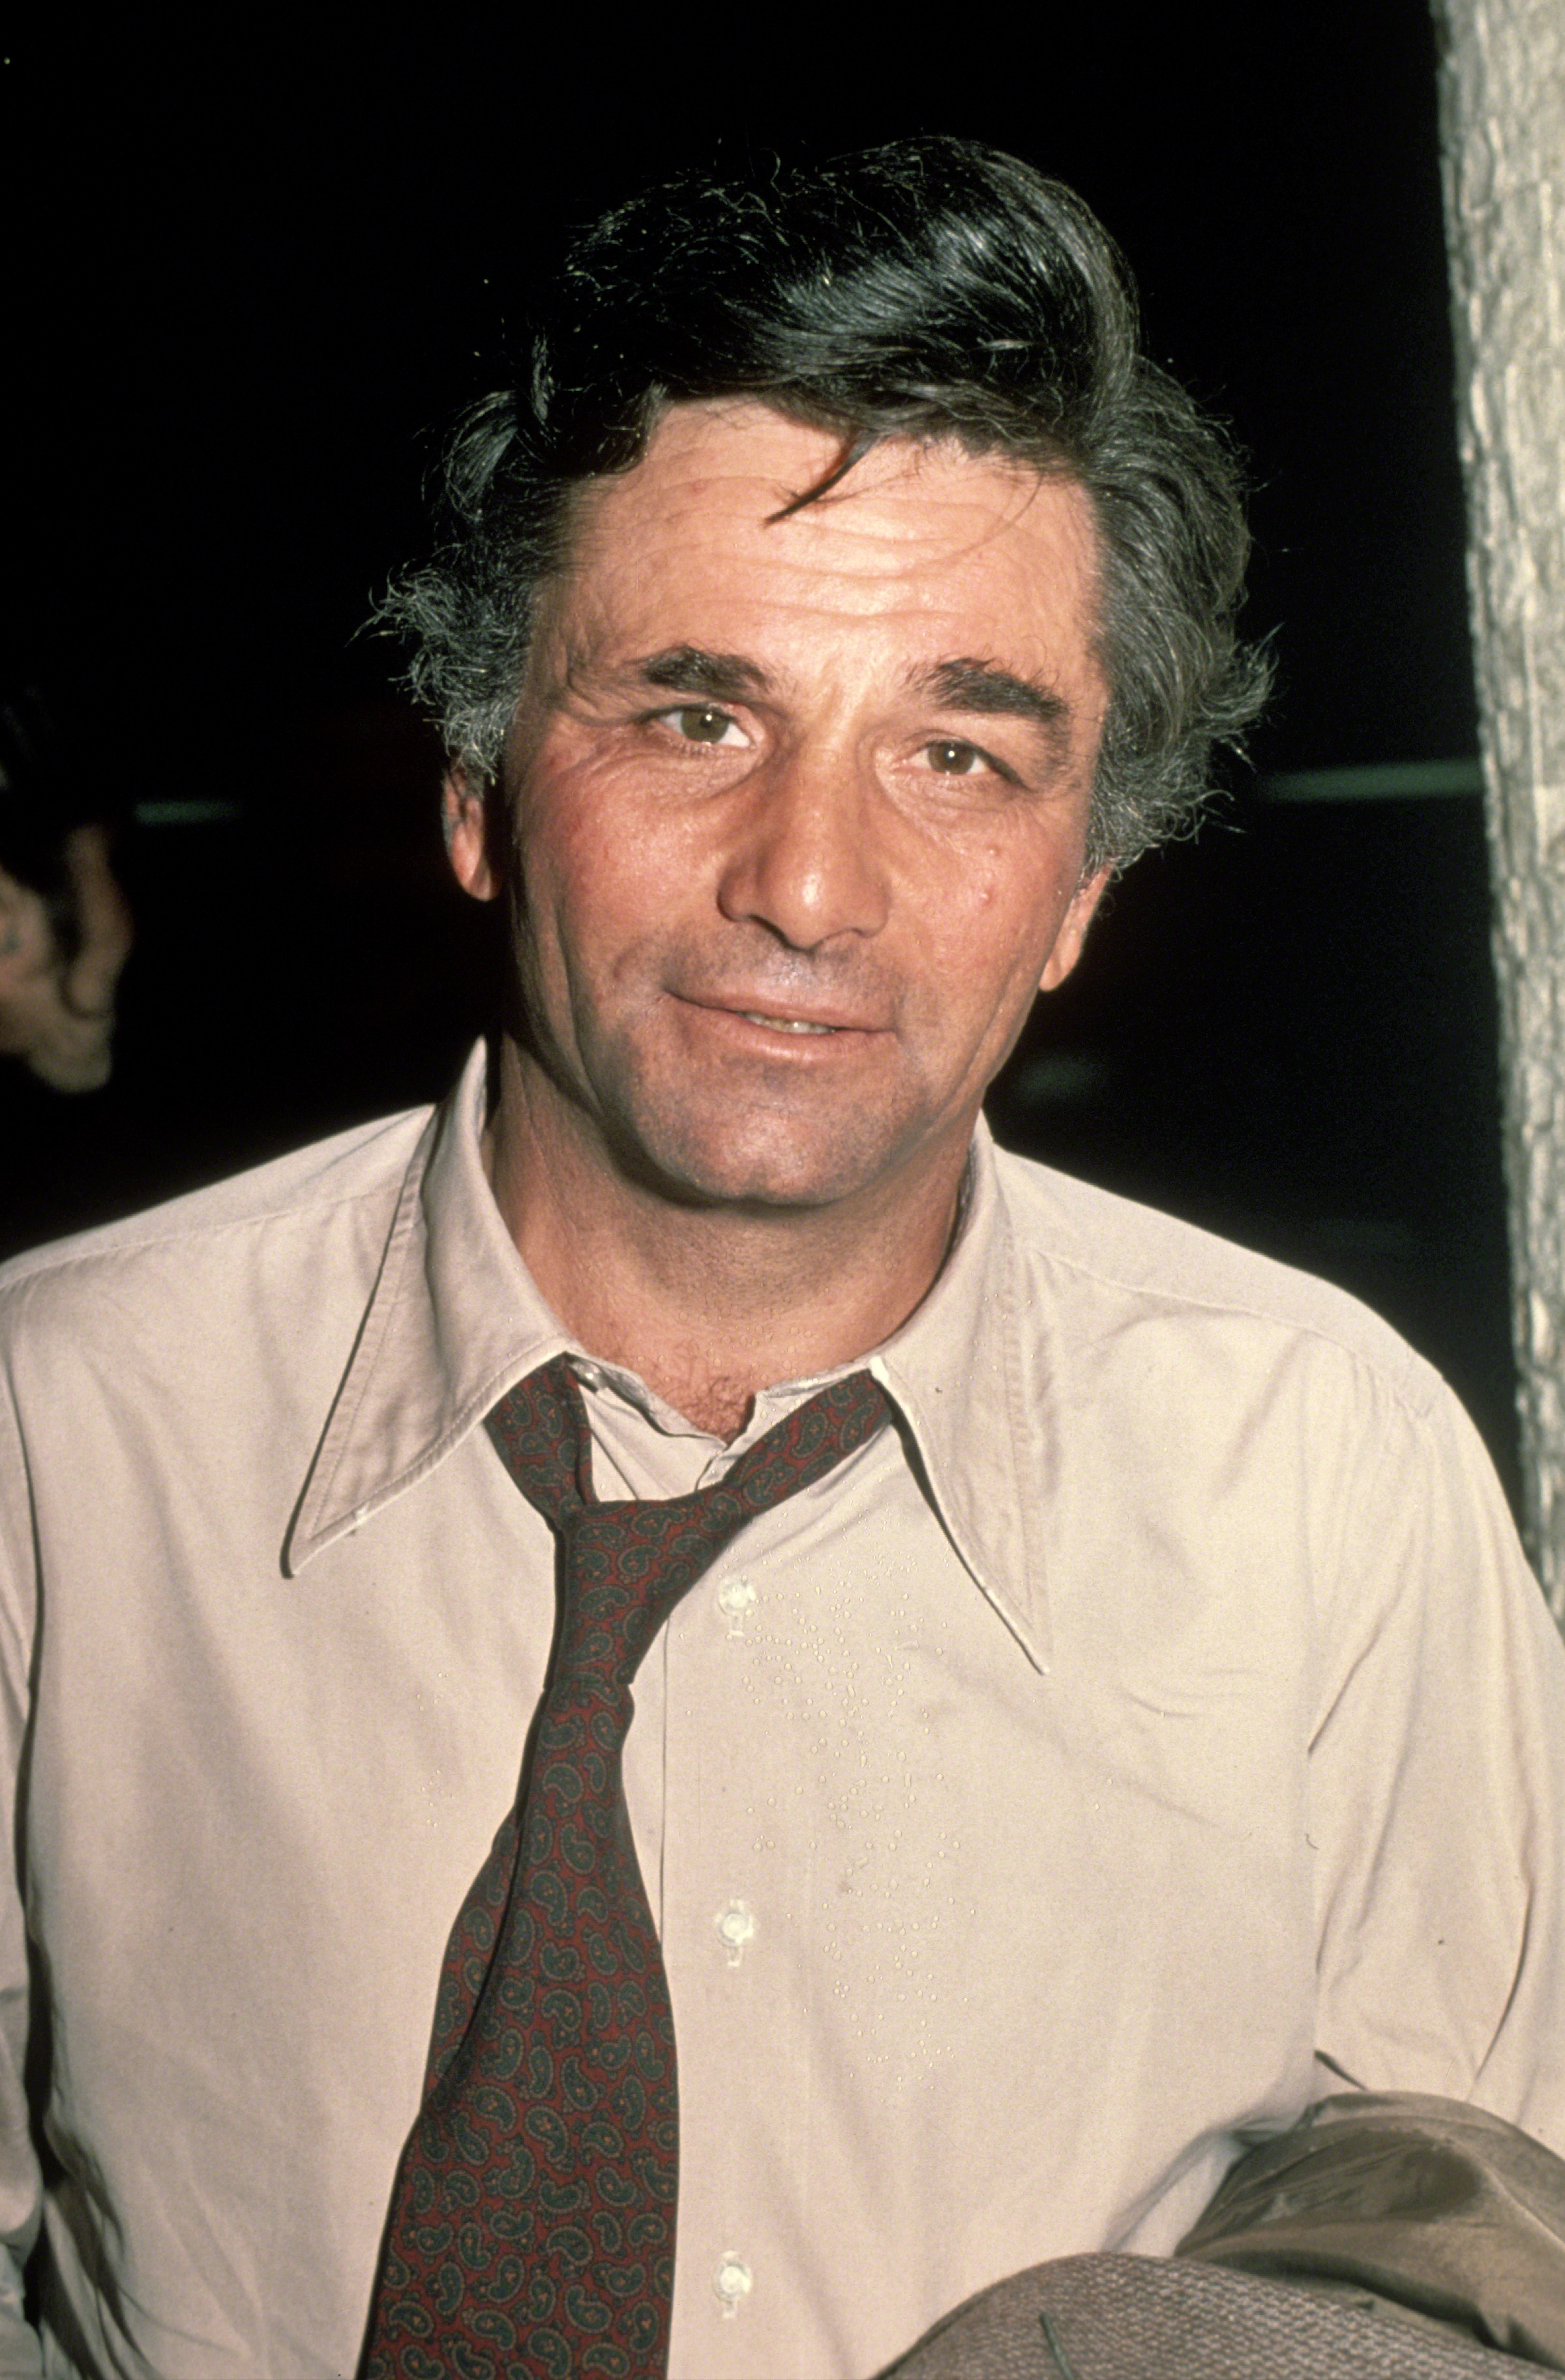 Peter Falk pictured on January 1, 1979 in New York City. | Source: Getty Images